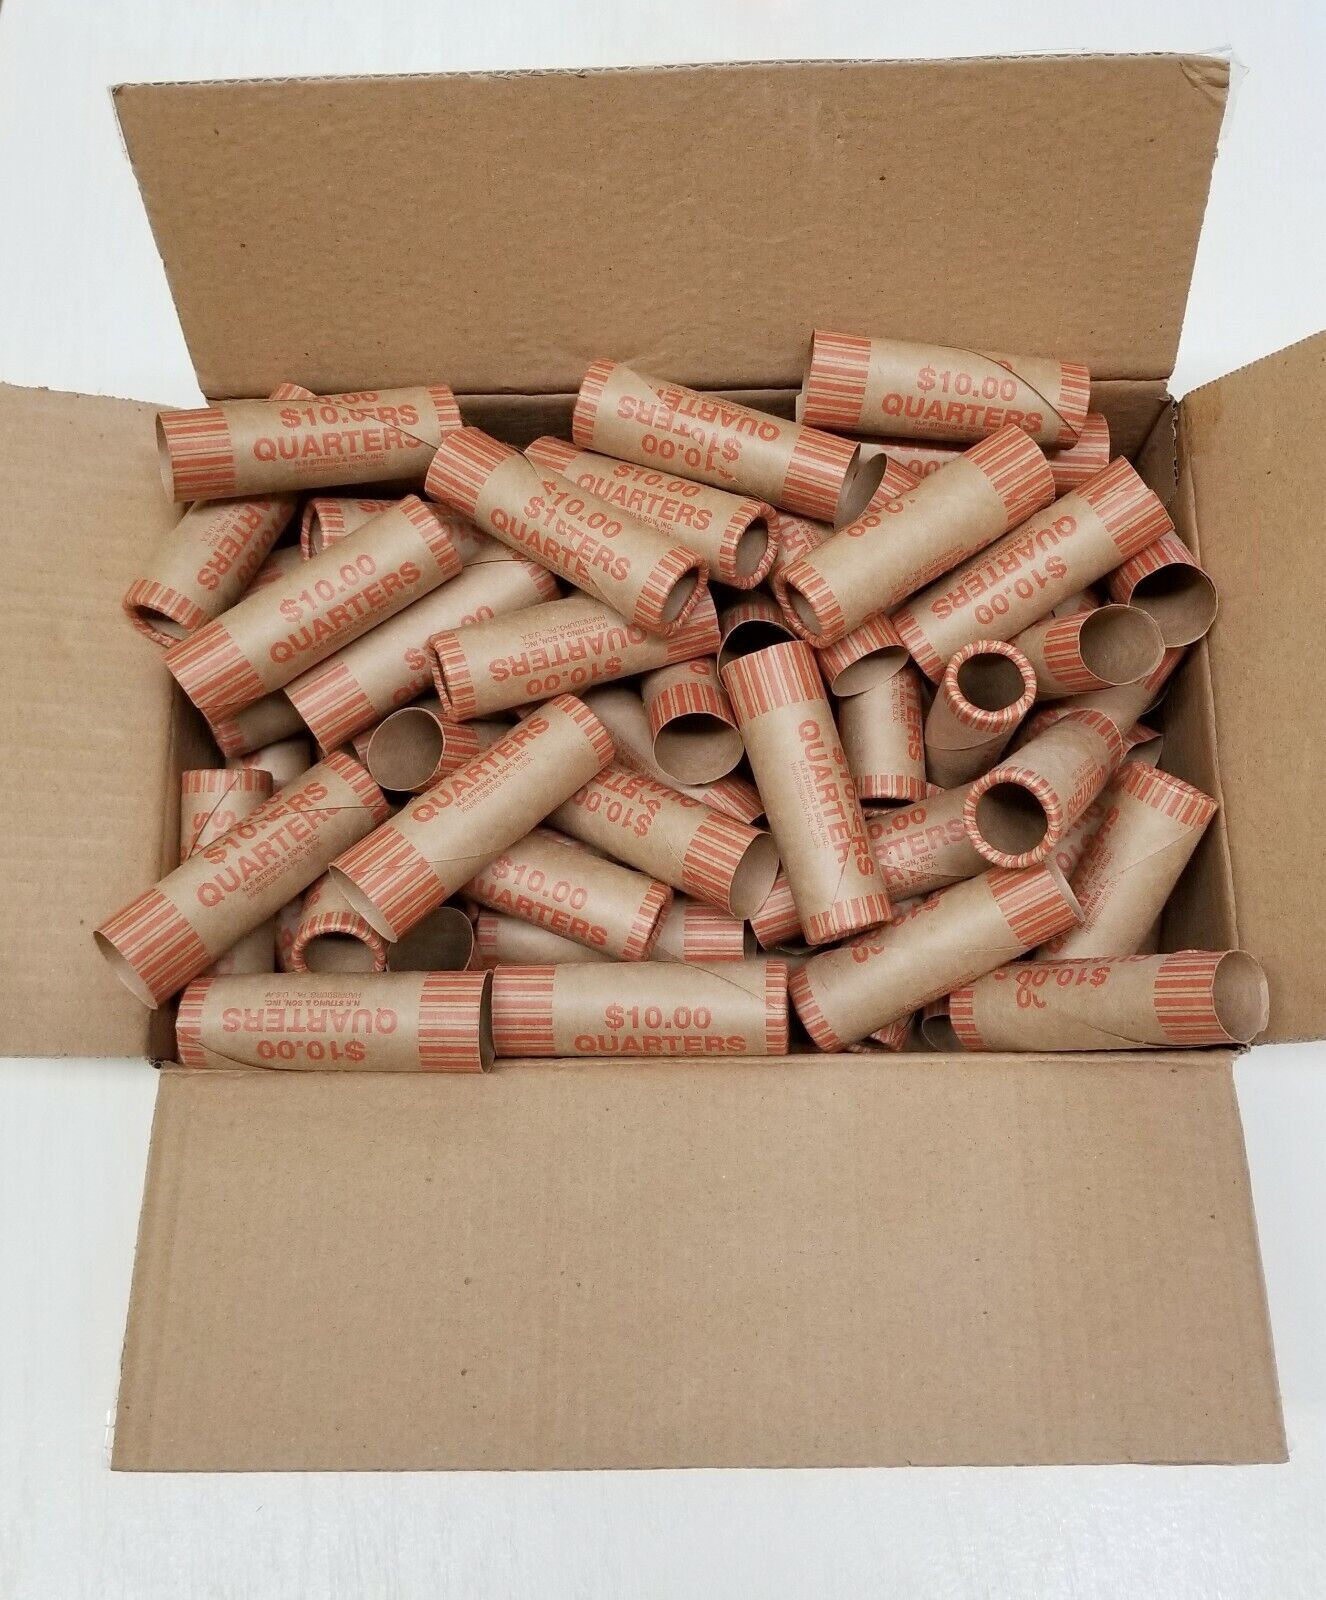 160 Rolls Preformed Coin Wrappers Paper Tubes For QUARTERS (Holds $10 Each) NEW